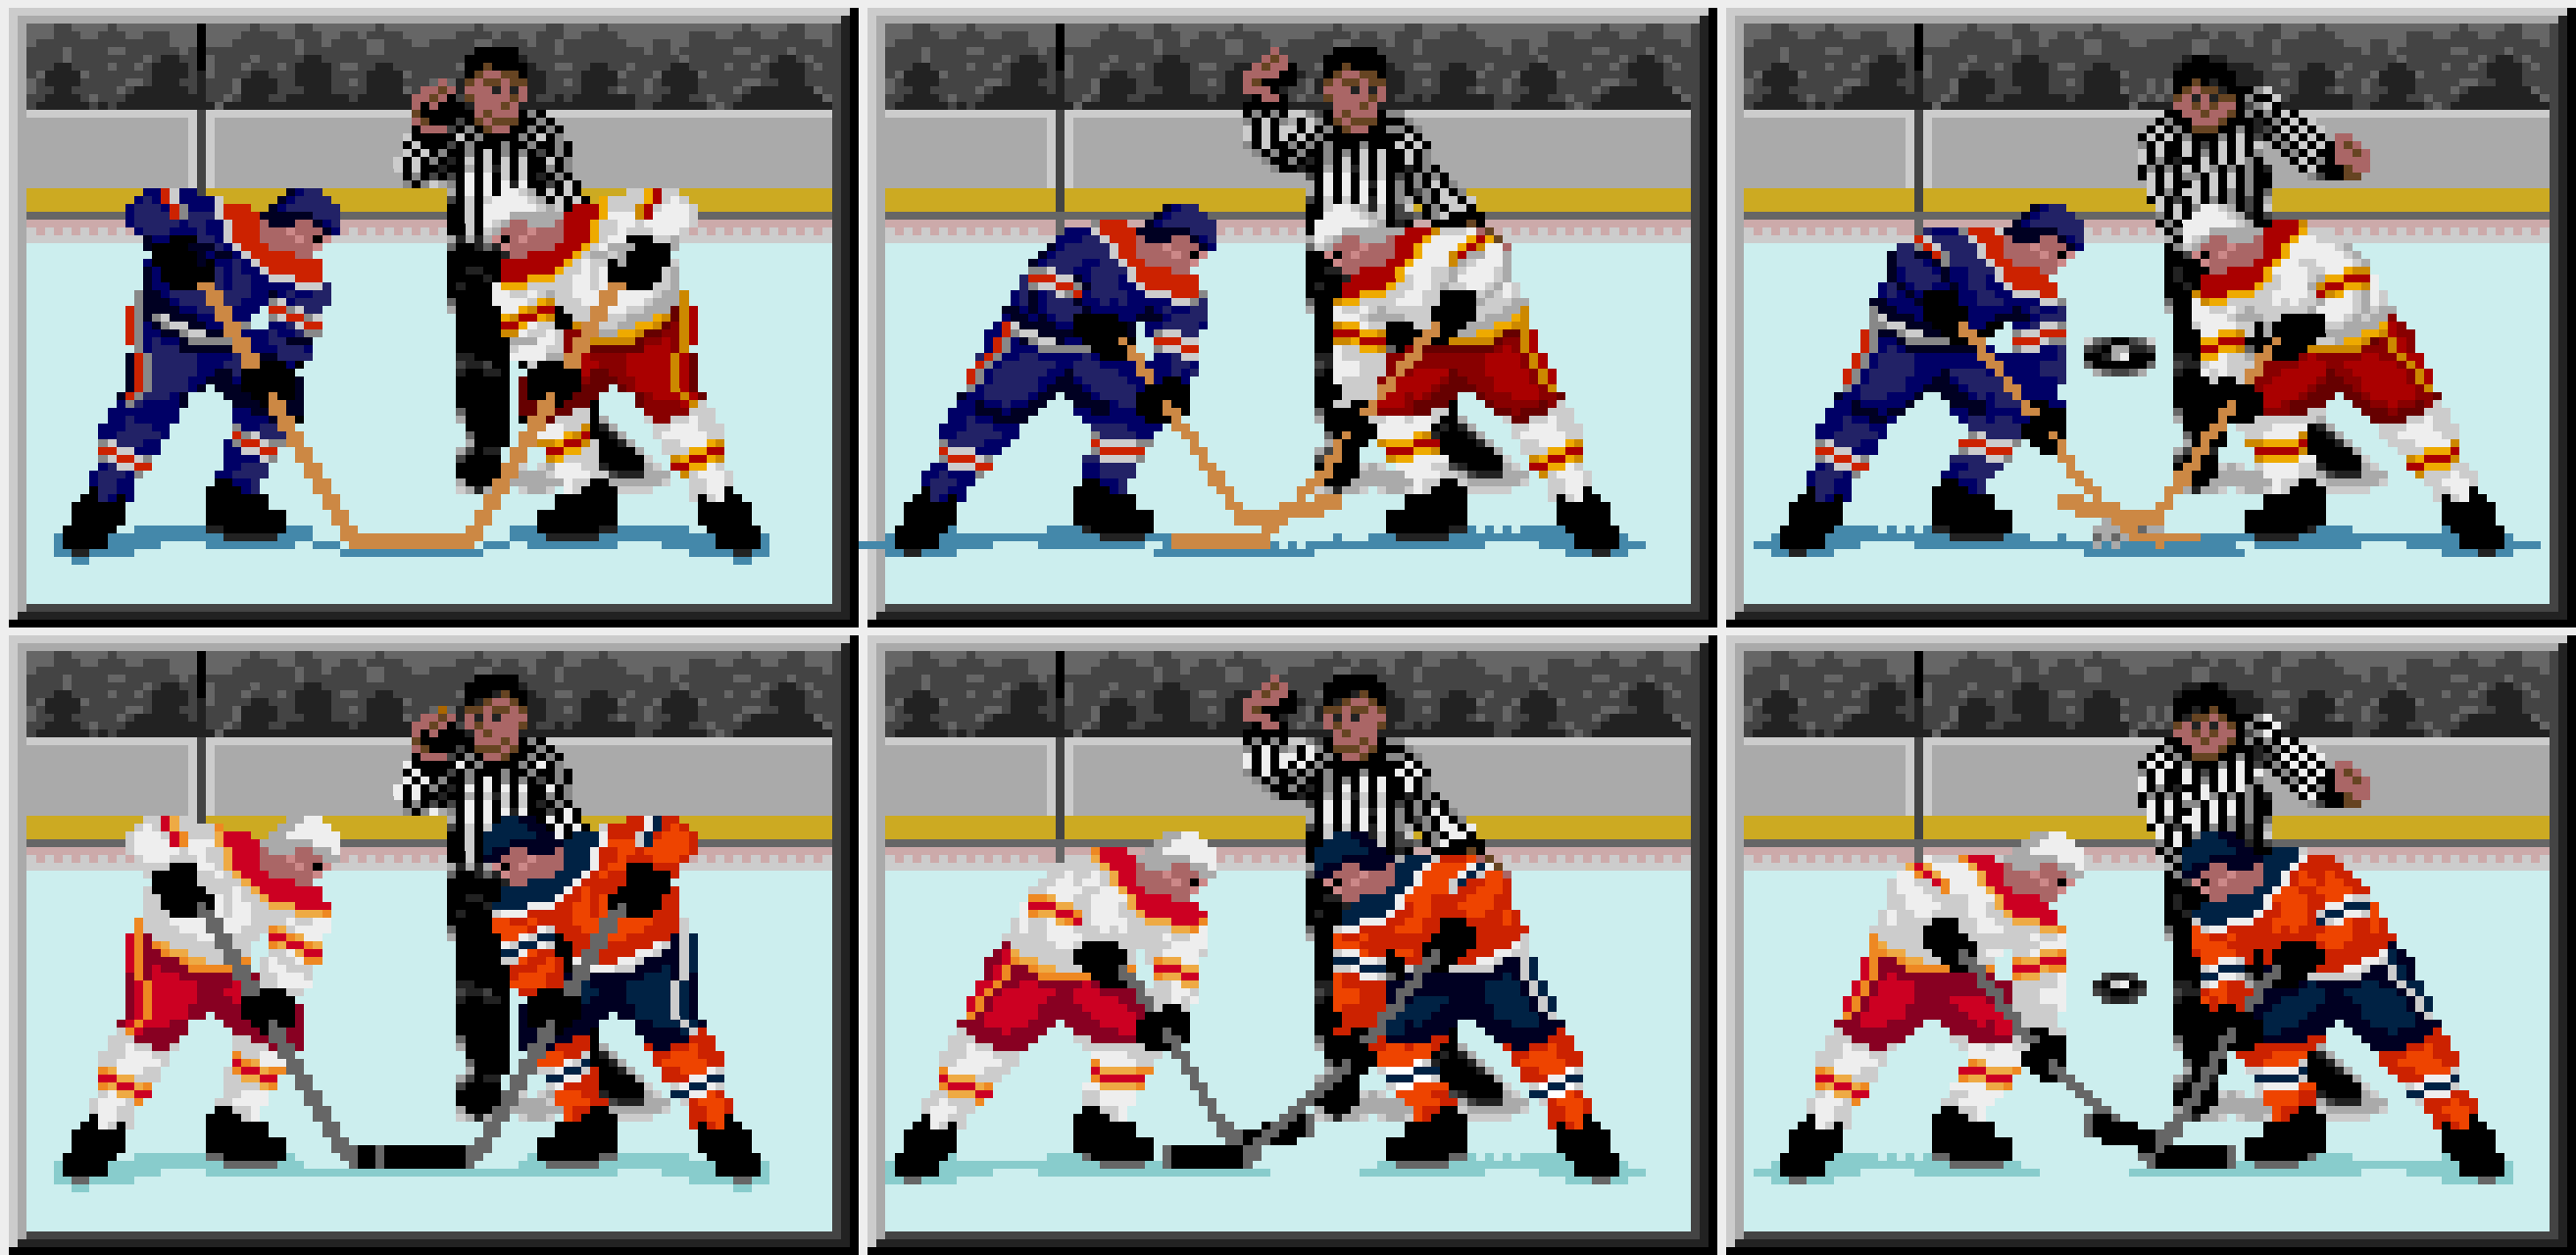 NHL99: A project ranking the greatest players in modern NHL